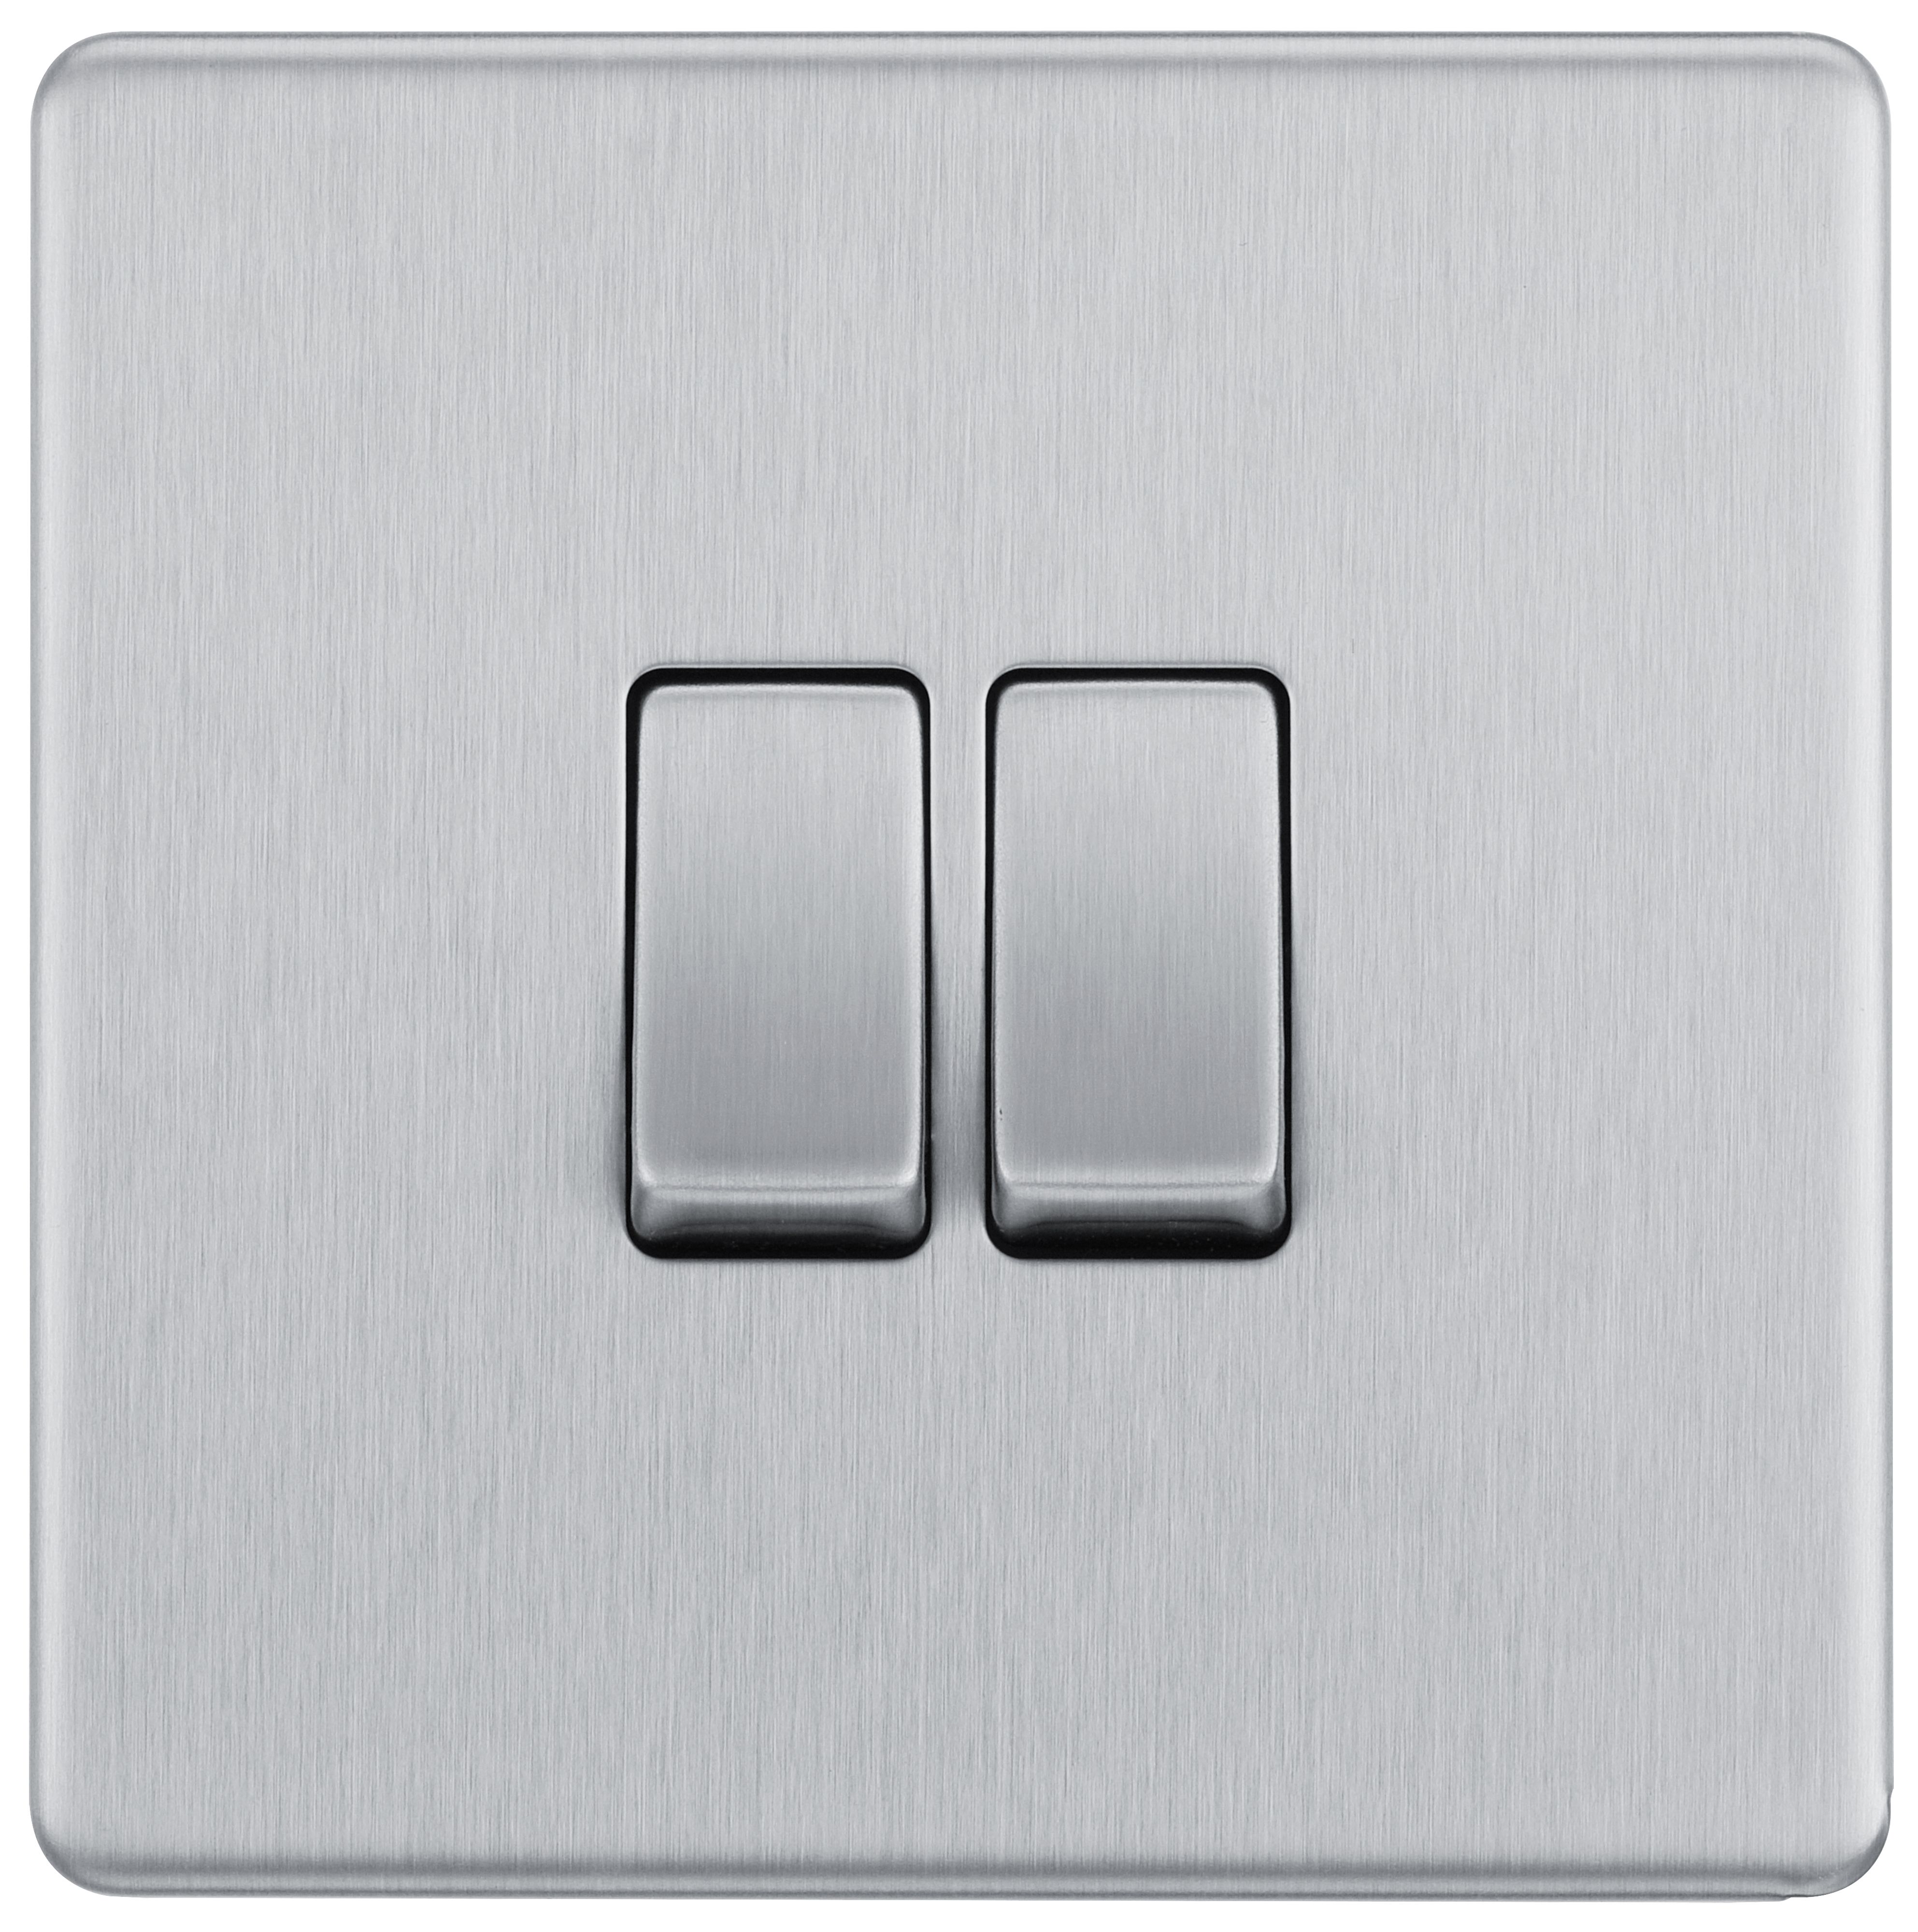 GoodHome Brushed Steel 20A 2 way 2 gang Light Screwless Switch